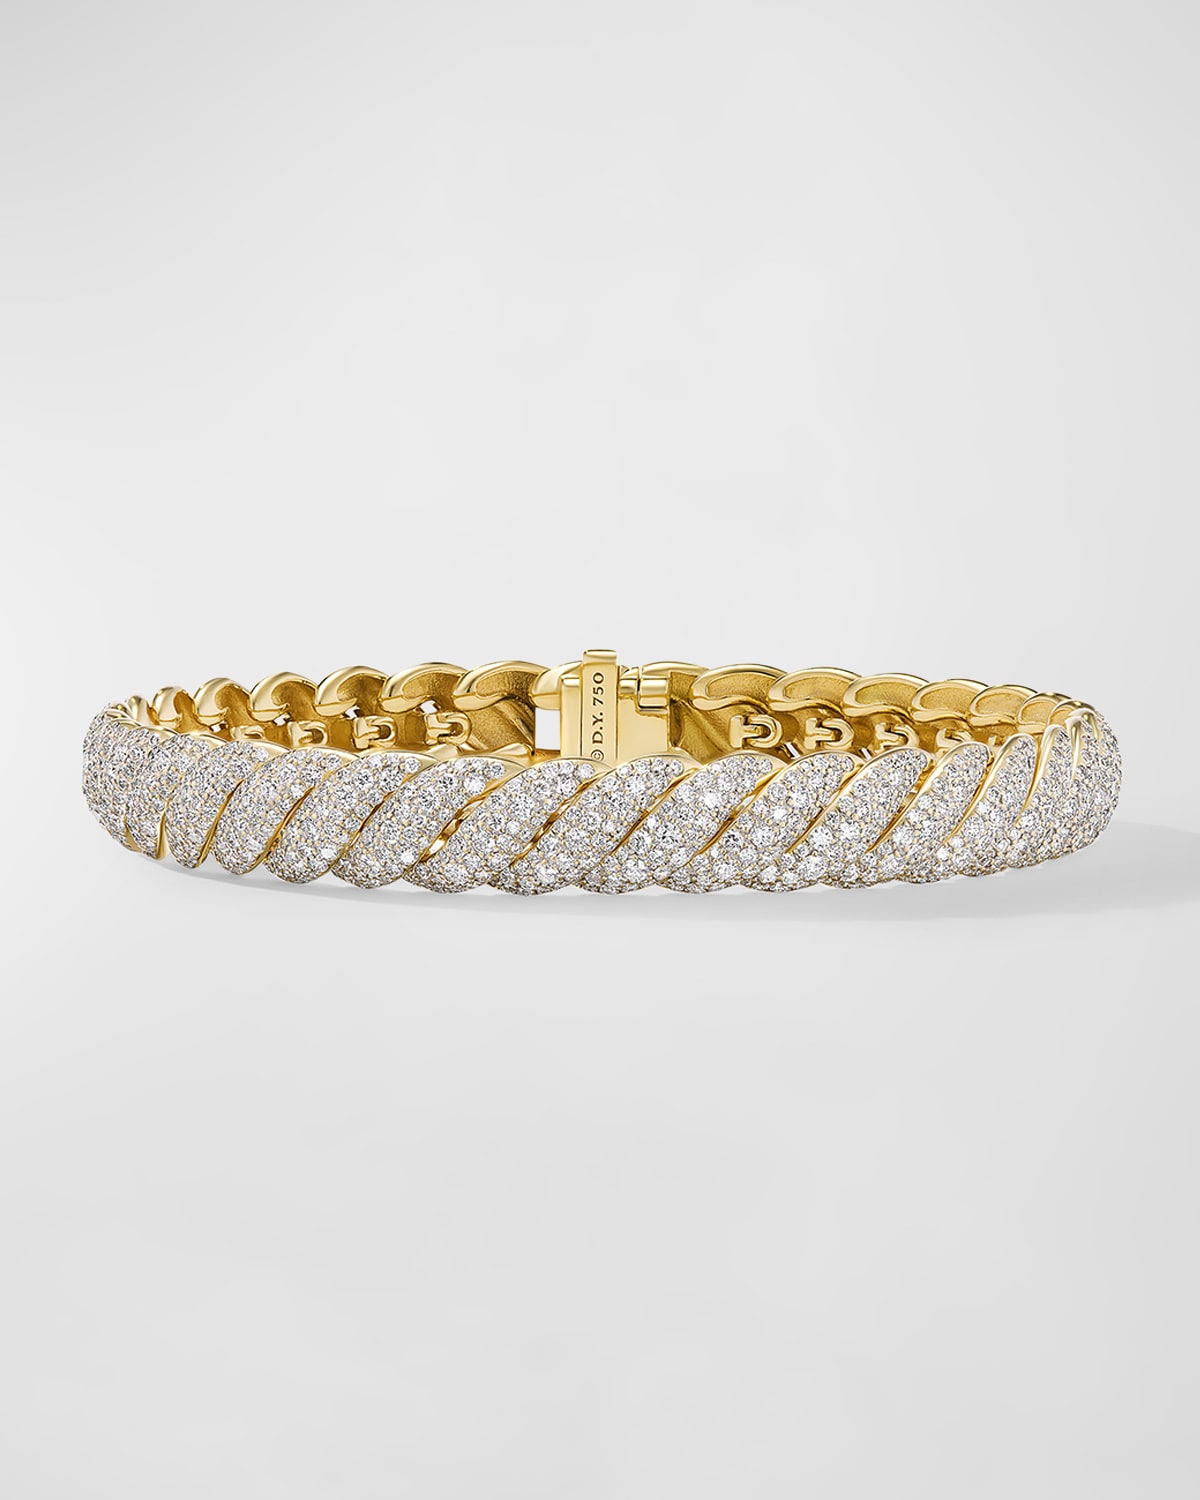 David Yurman Sculpted Cable Bracelet With Diamonds In 18k Gold, 8.5mm In 60 Multi-colored